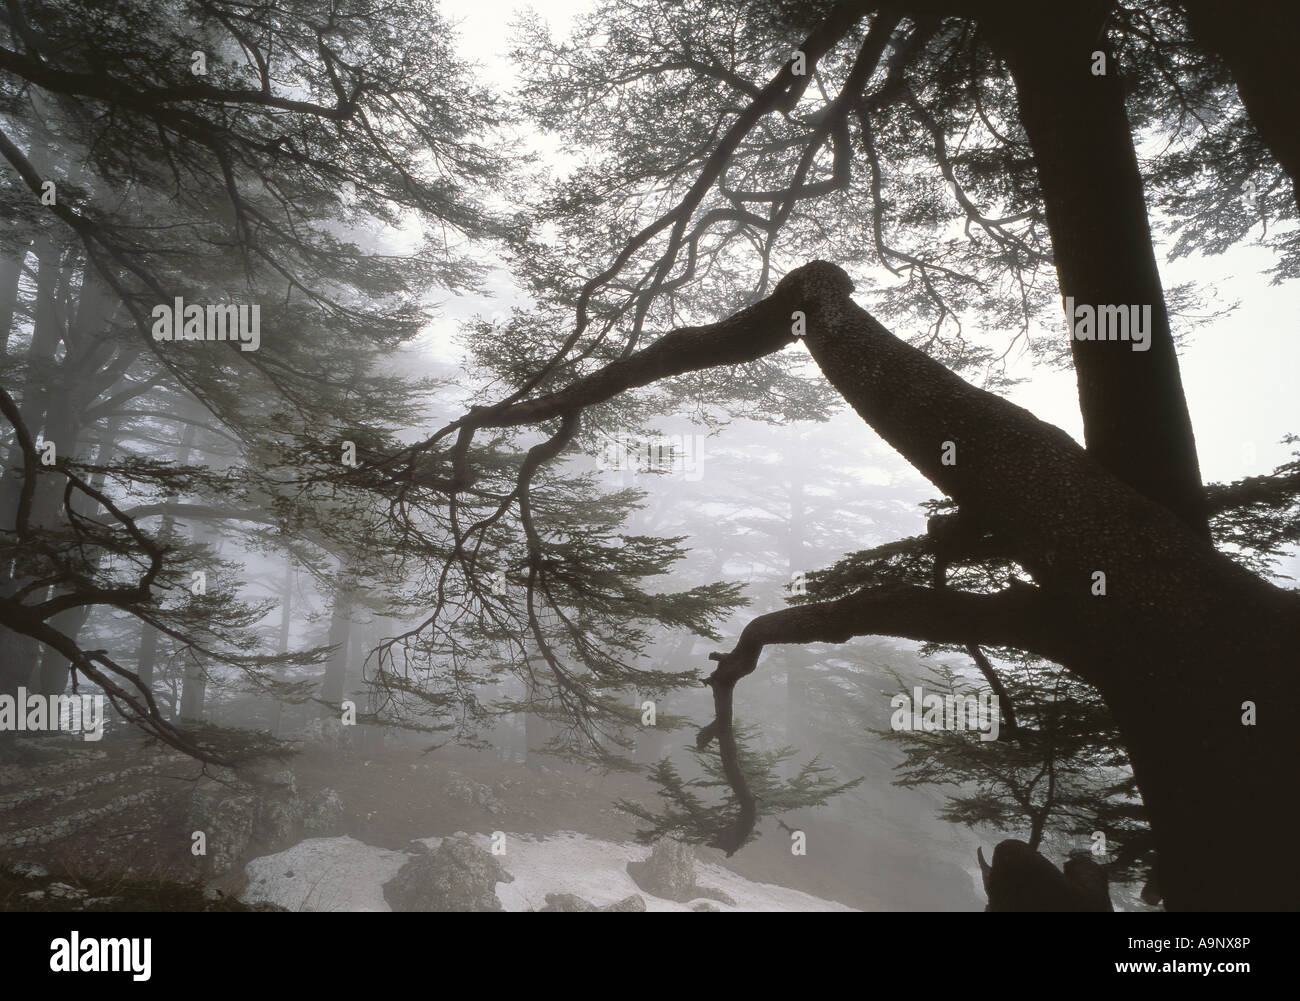 The last remaining ancient forest of Cedar of Lebanon (Cedrus libani) trees in Bcharre Valley Lebanon Stock Photo